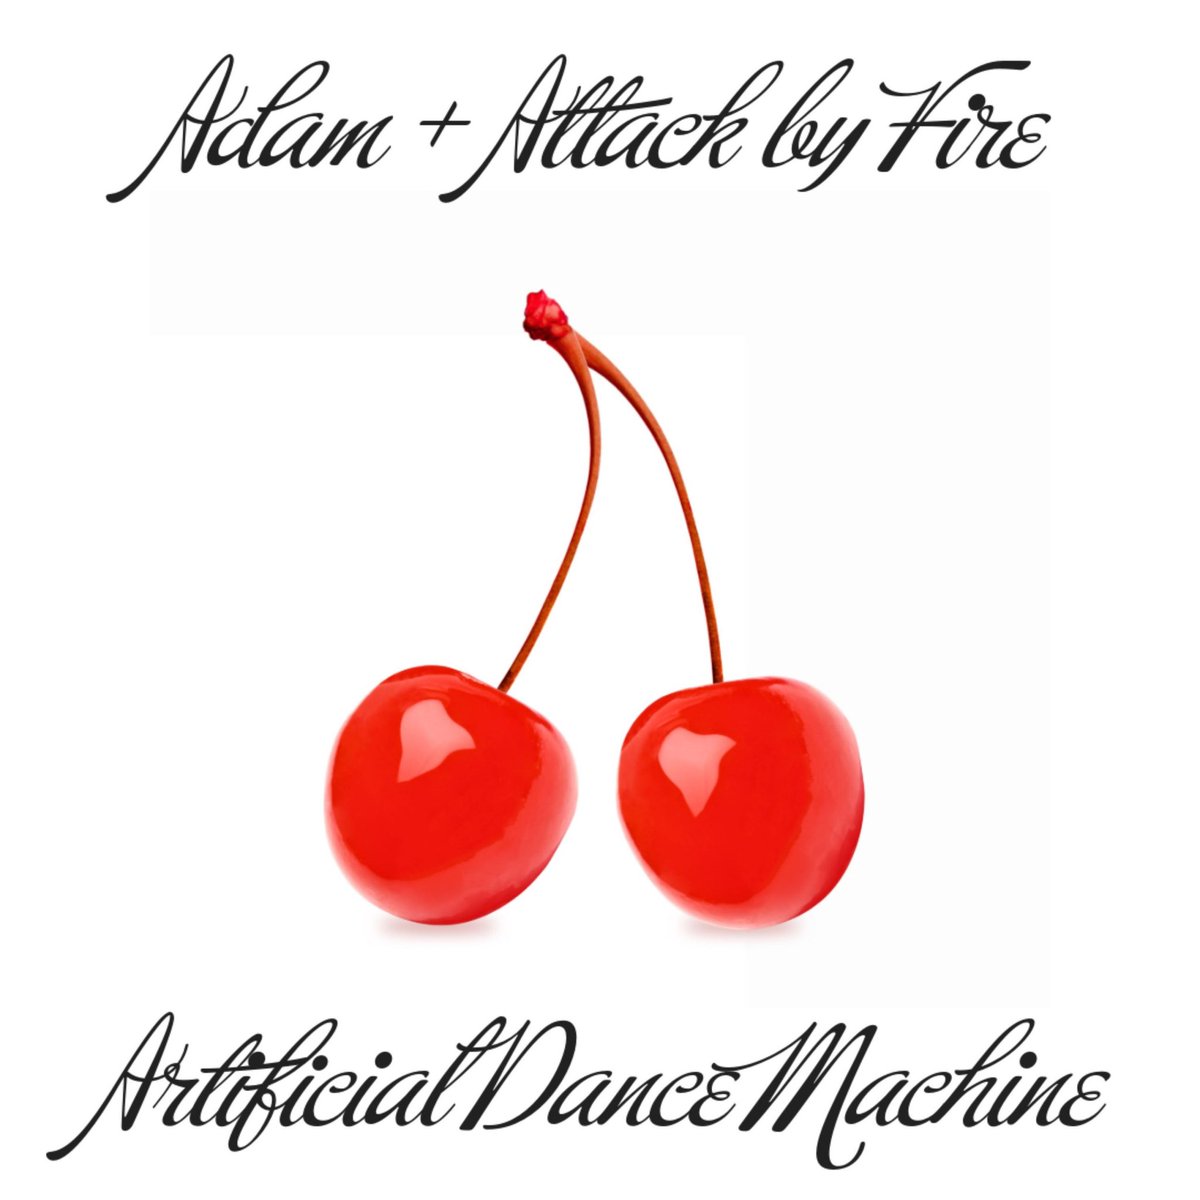 Listen to the single 'Artificial Dance Machine' and enjoy a great new song from Adam + Attack by Fire.
#indiedockmusicblog #glamrock

indiedockmusicblog.co.uk/?p=23968